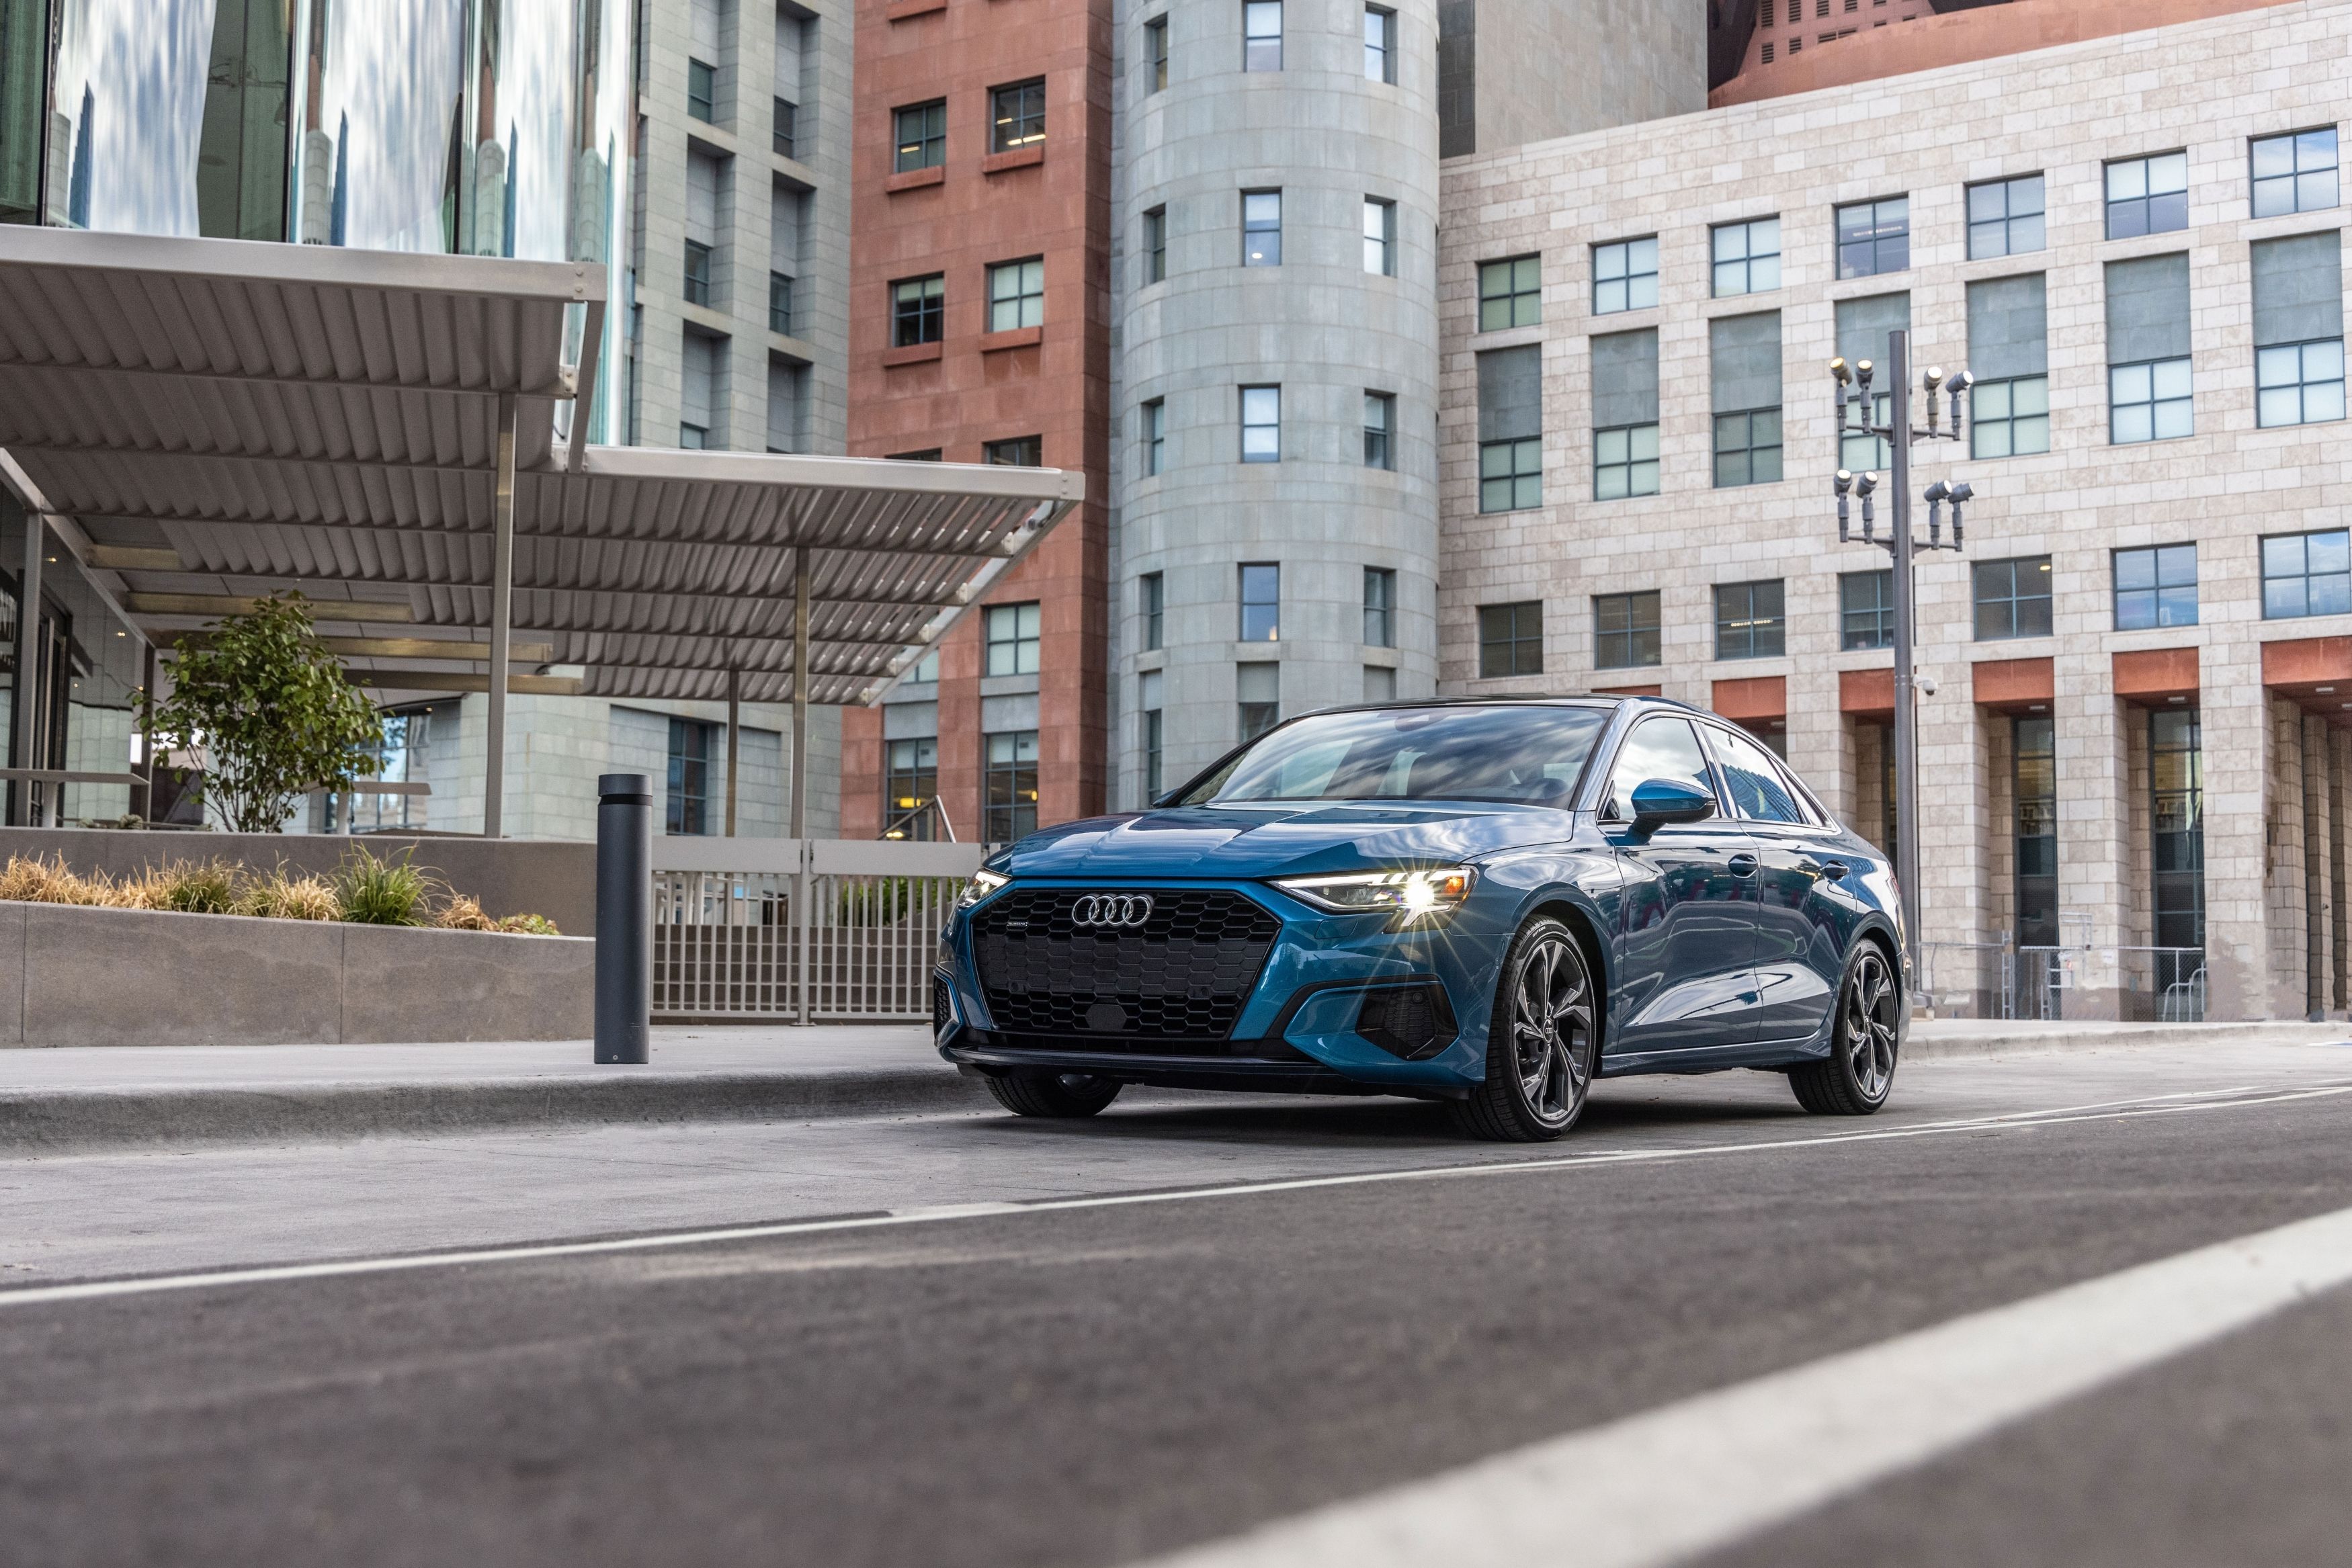 The 2022 Audi A3 drives through the city.